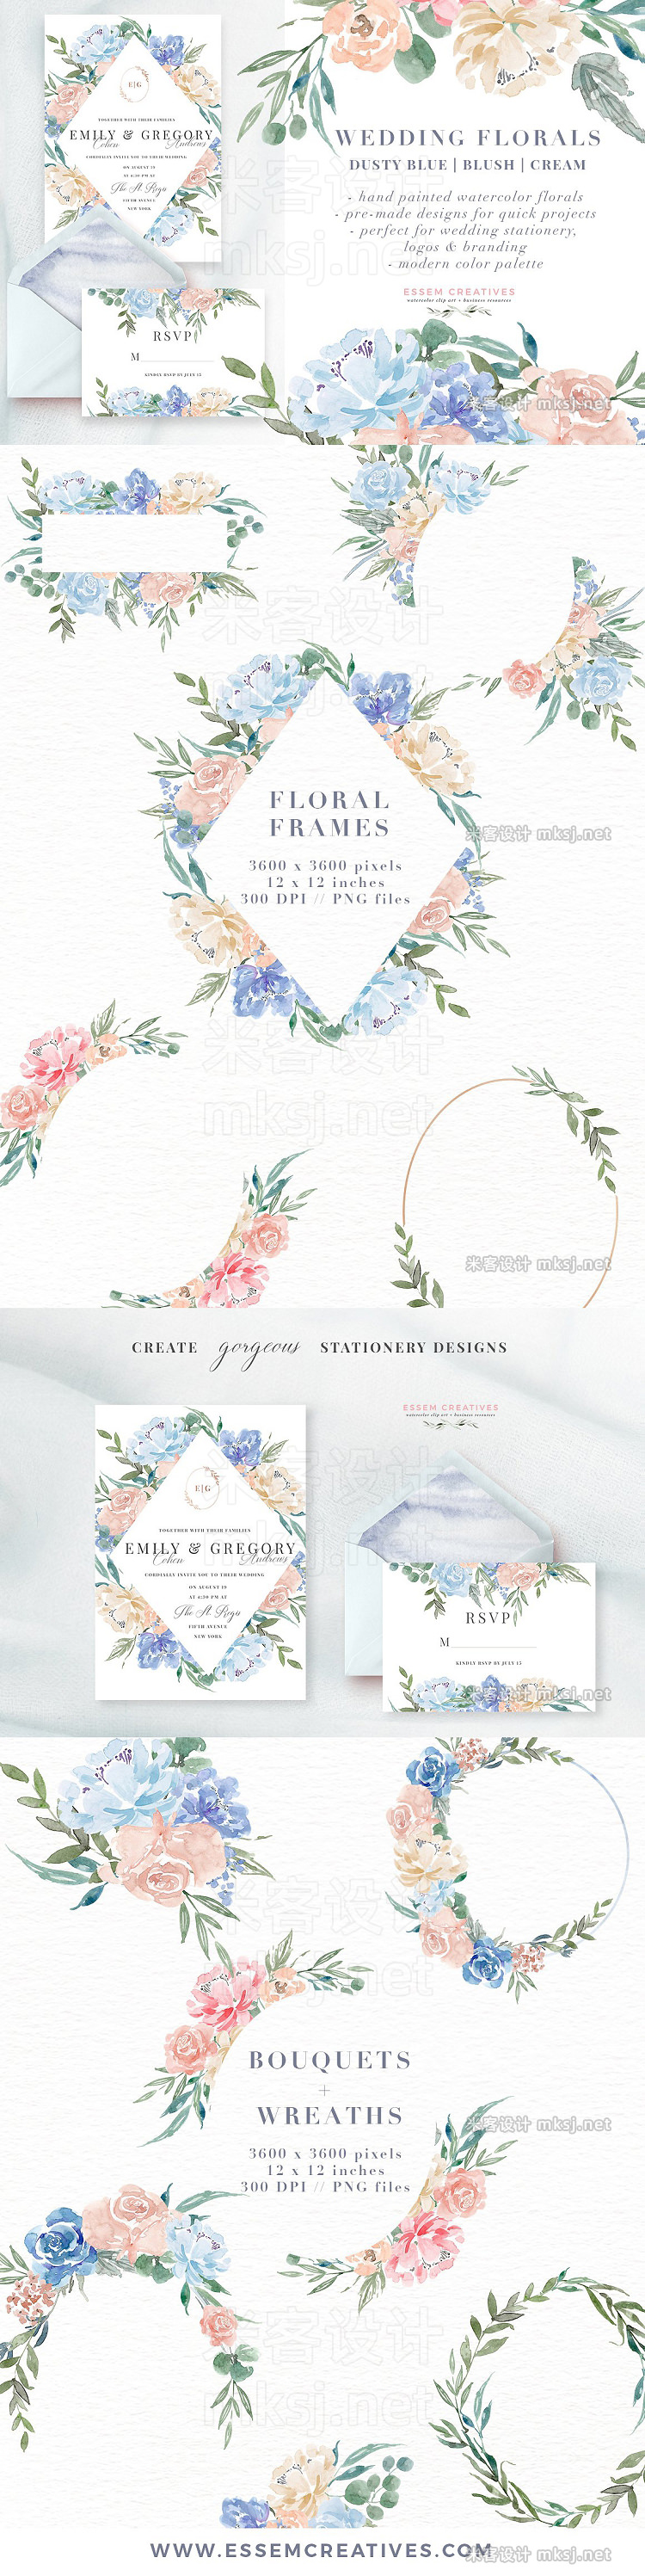 png素材 Wedding Watercolor Flowers Graphics